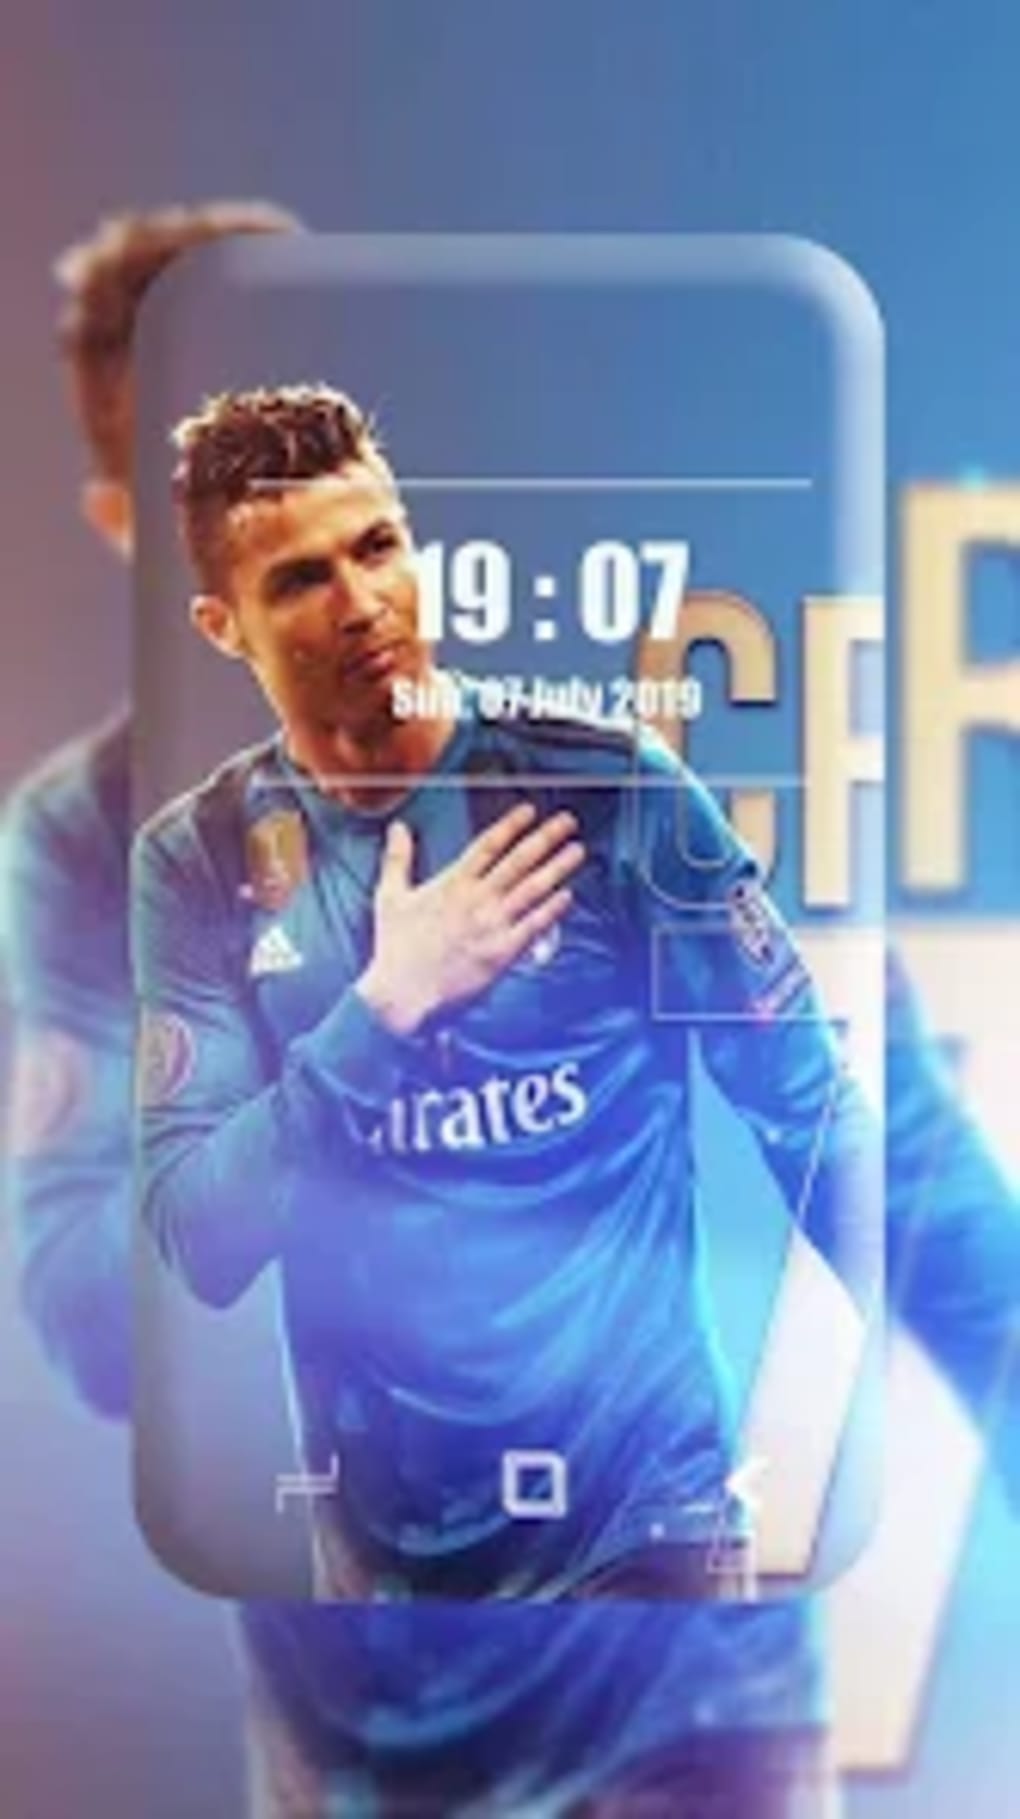 Fans Messi Ronaldo Wallpaper for Android - Download